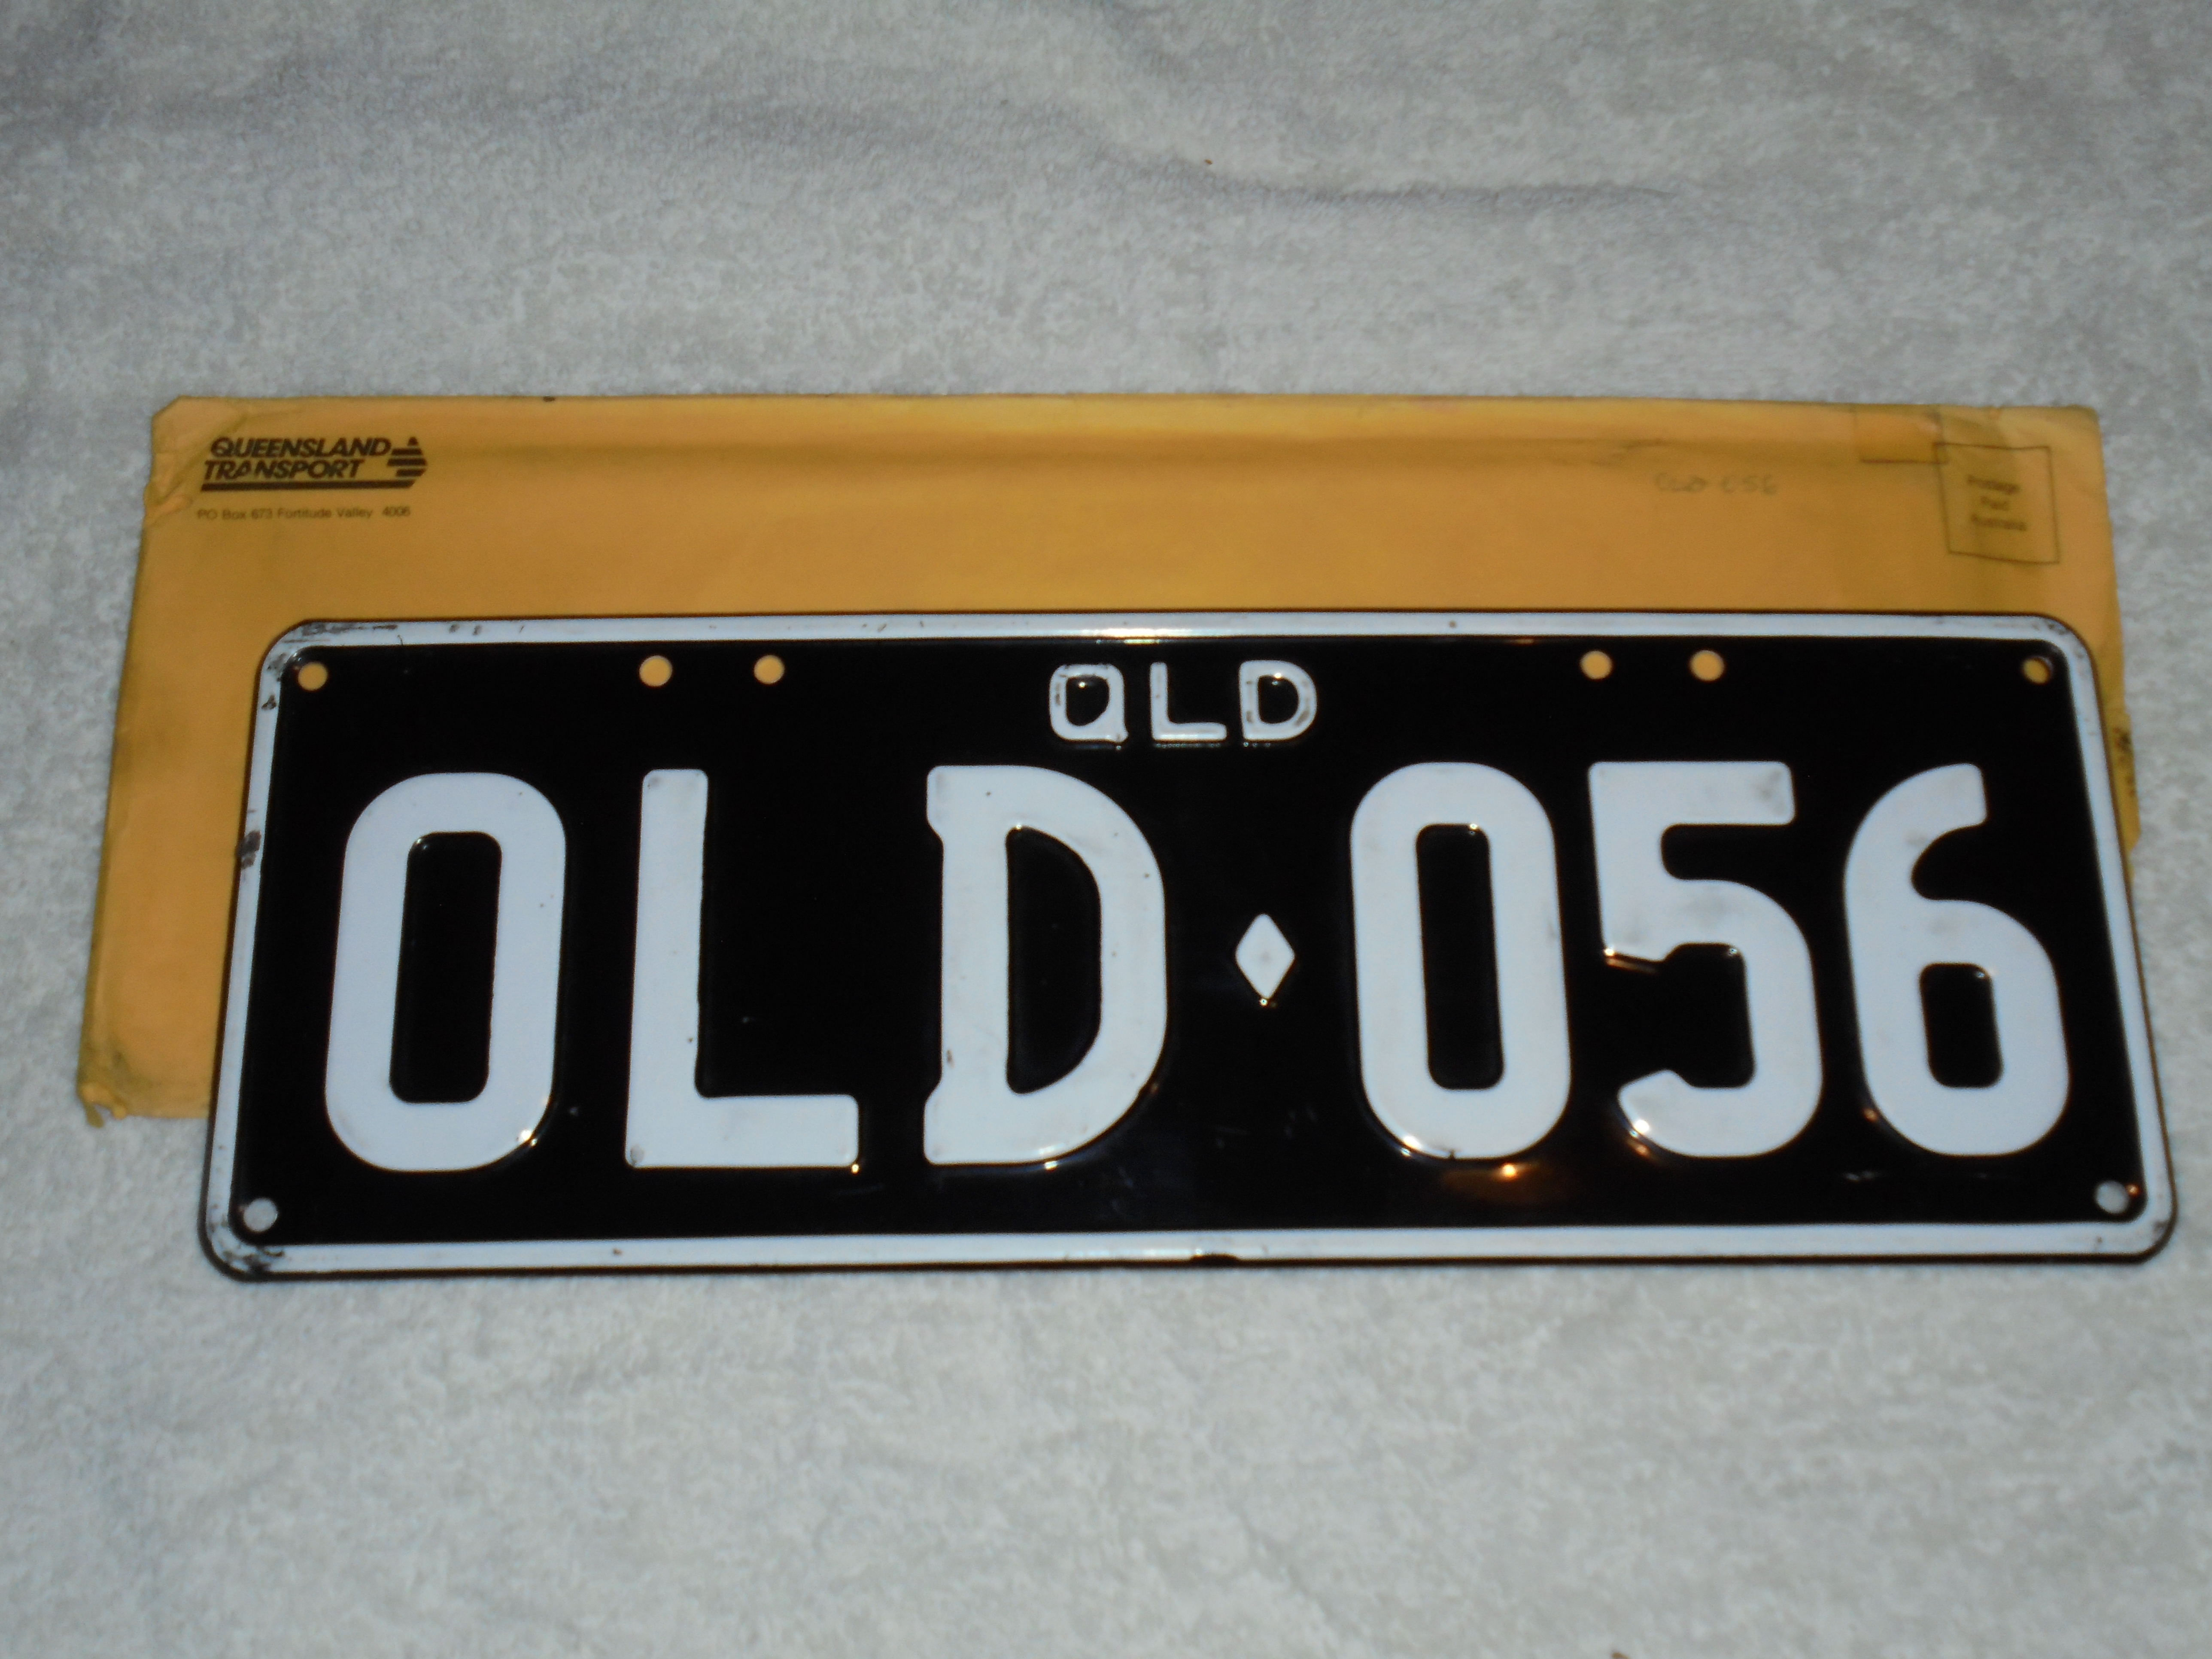 New Genuine QLD Black & White Number Plates -SUIT Any 1956 Vehicle